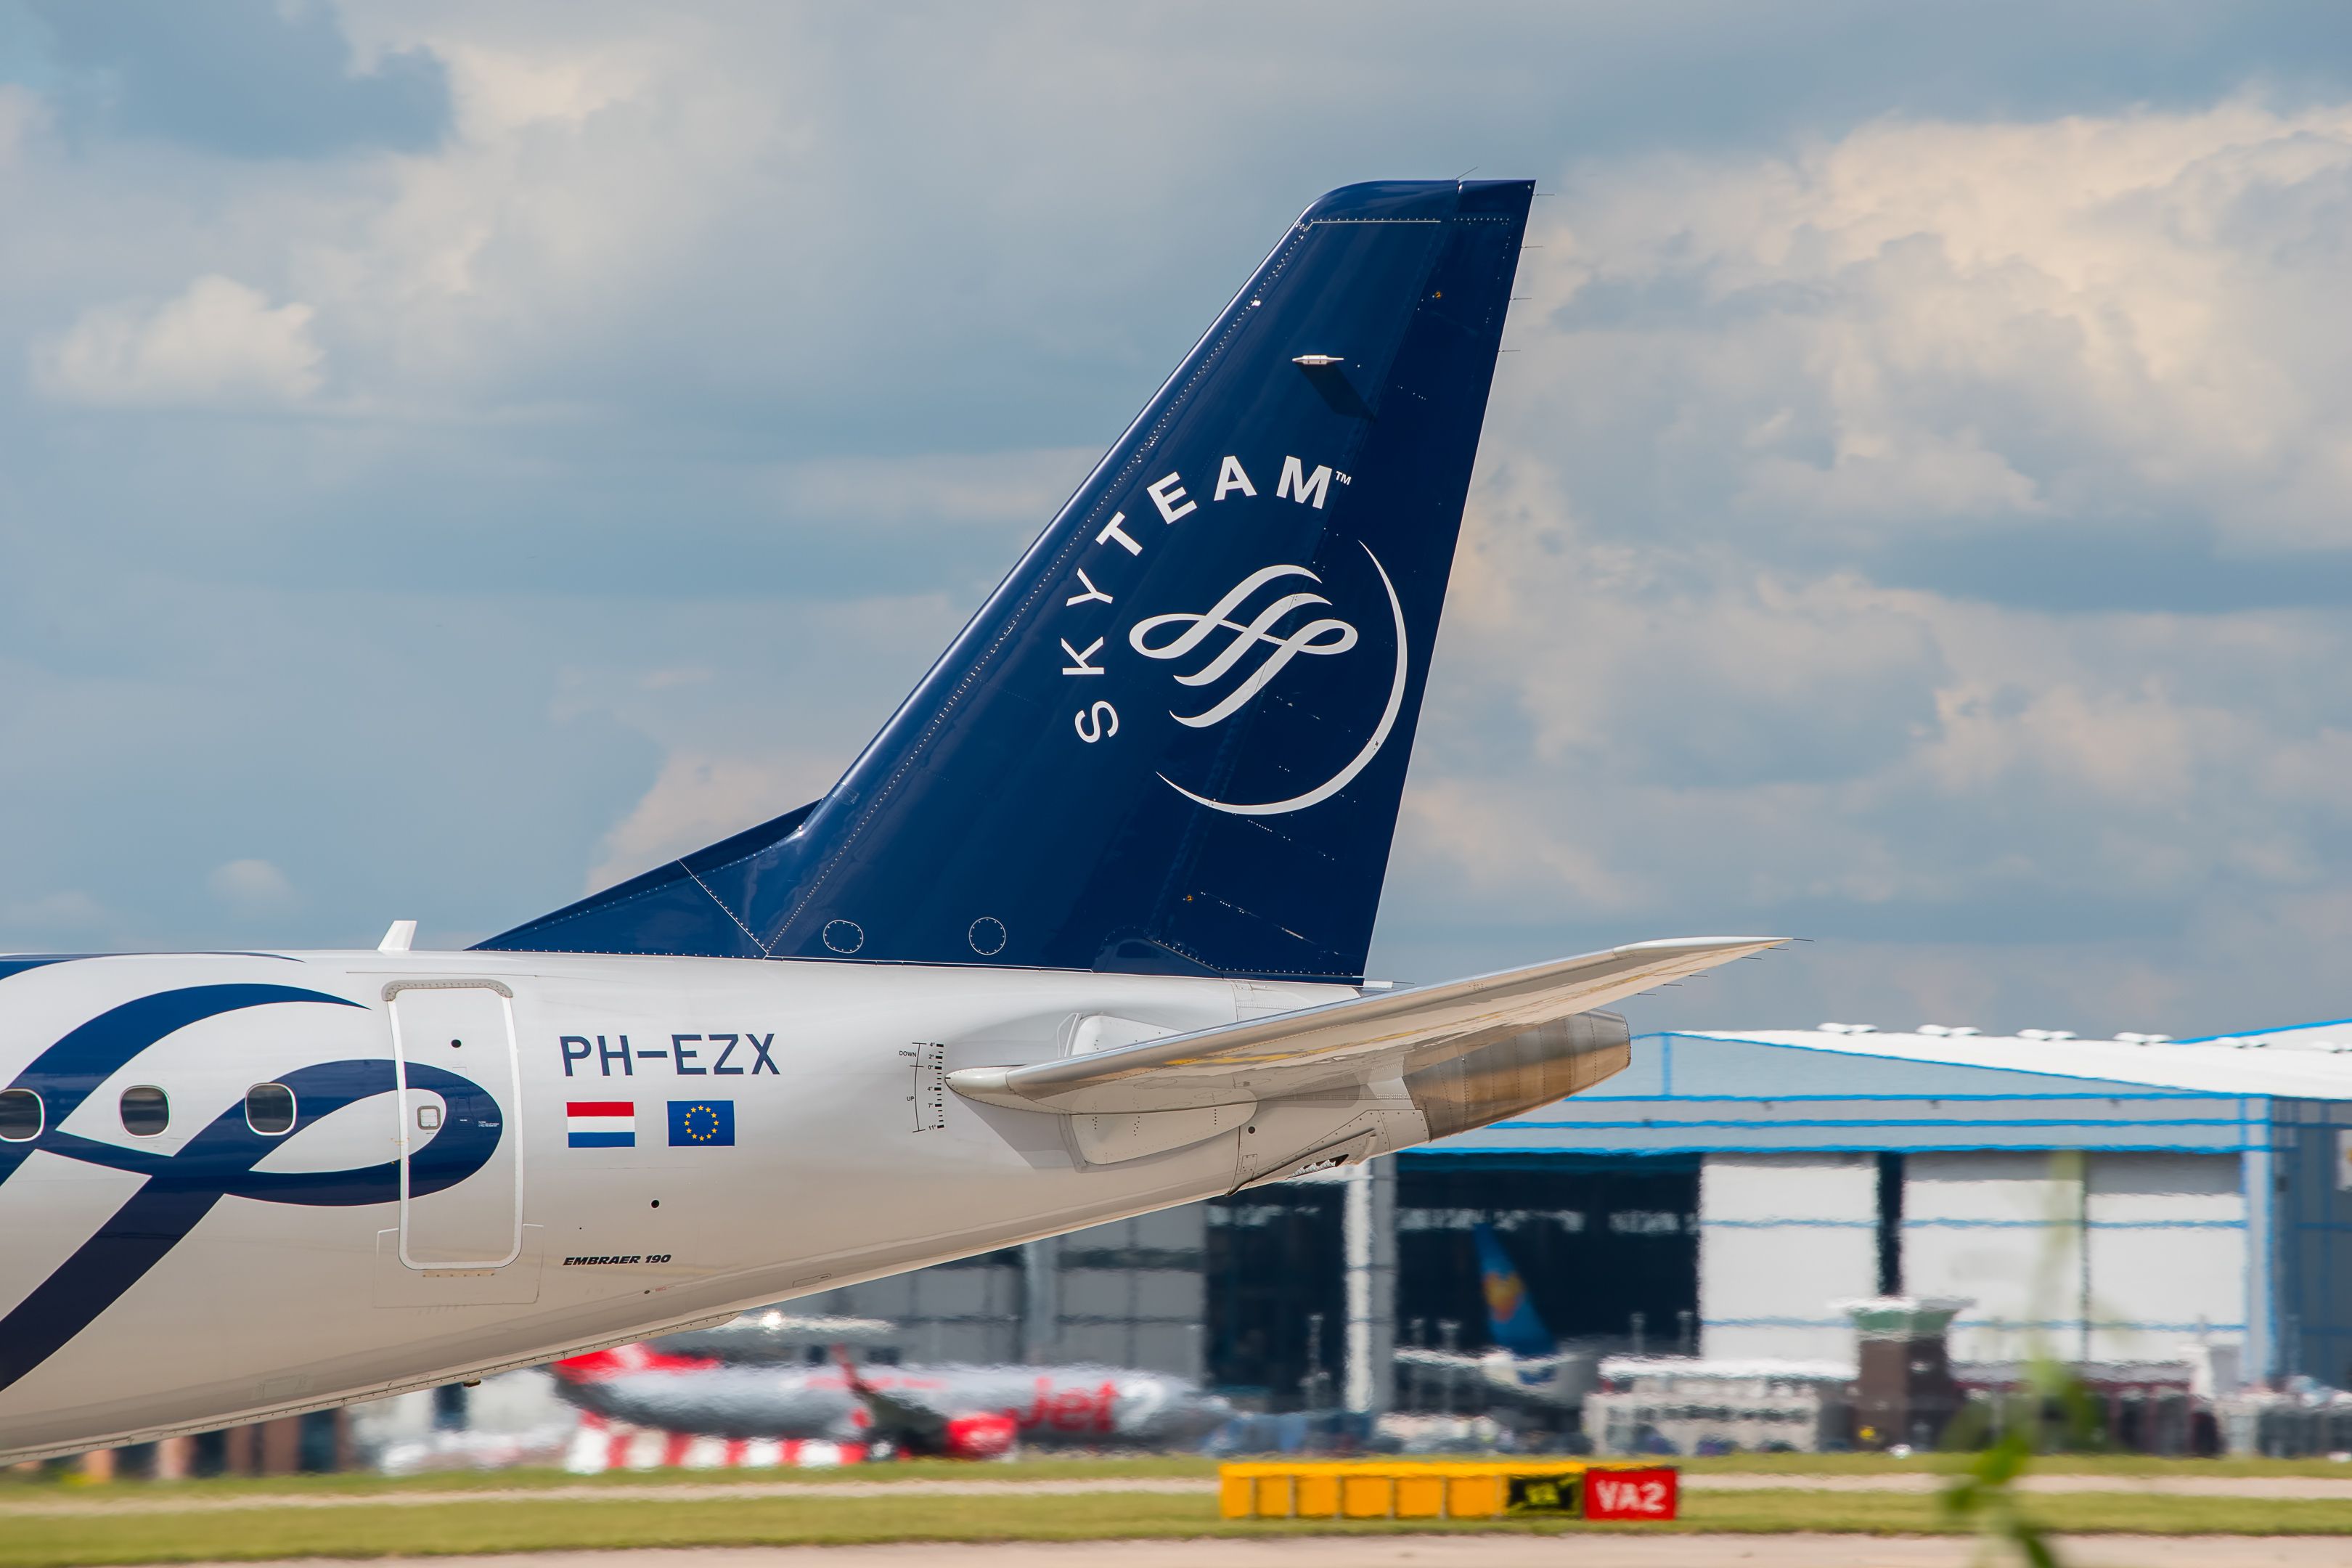 KLM (Skyteam) Cityhopper Embraer ERJ-190 tail livery at Manchester Airport 